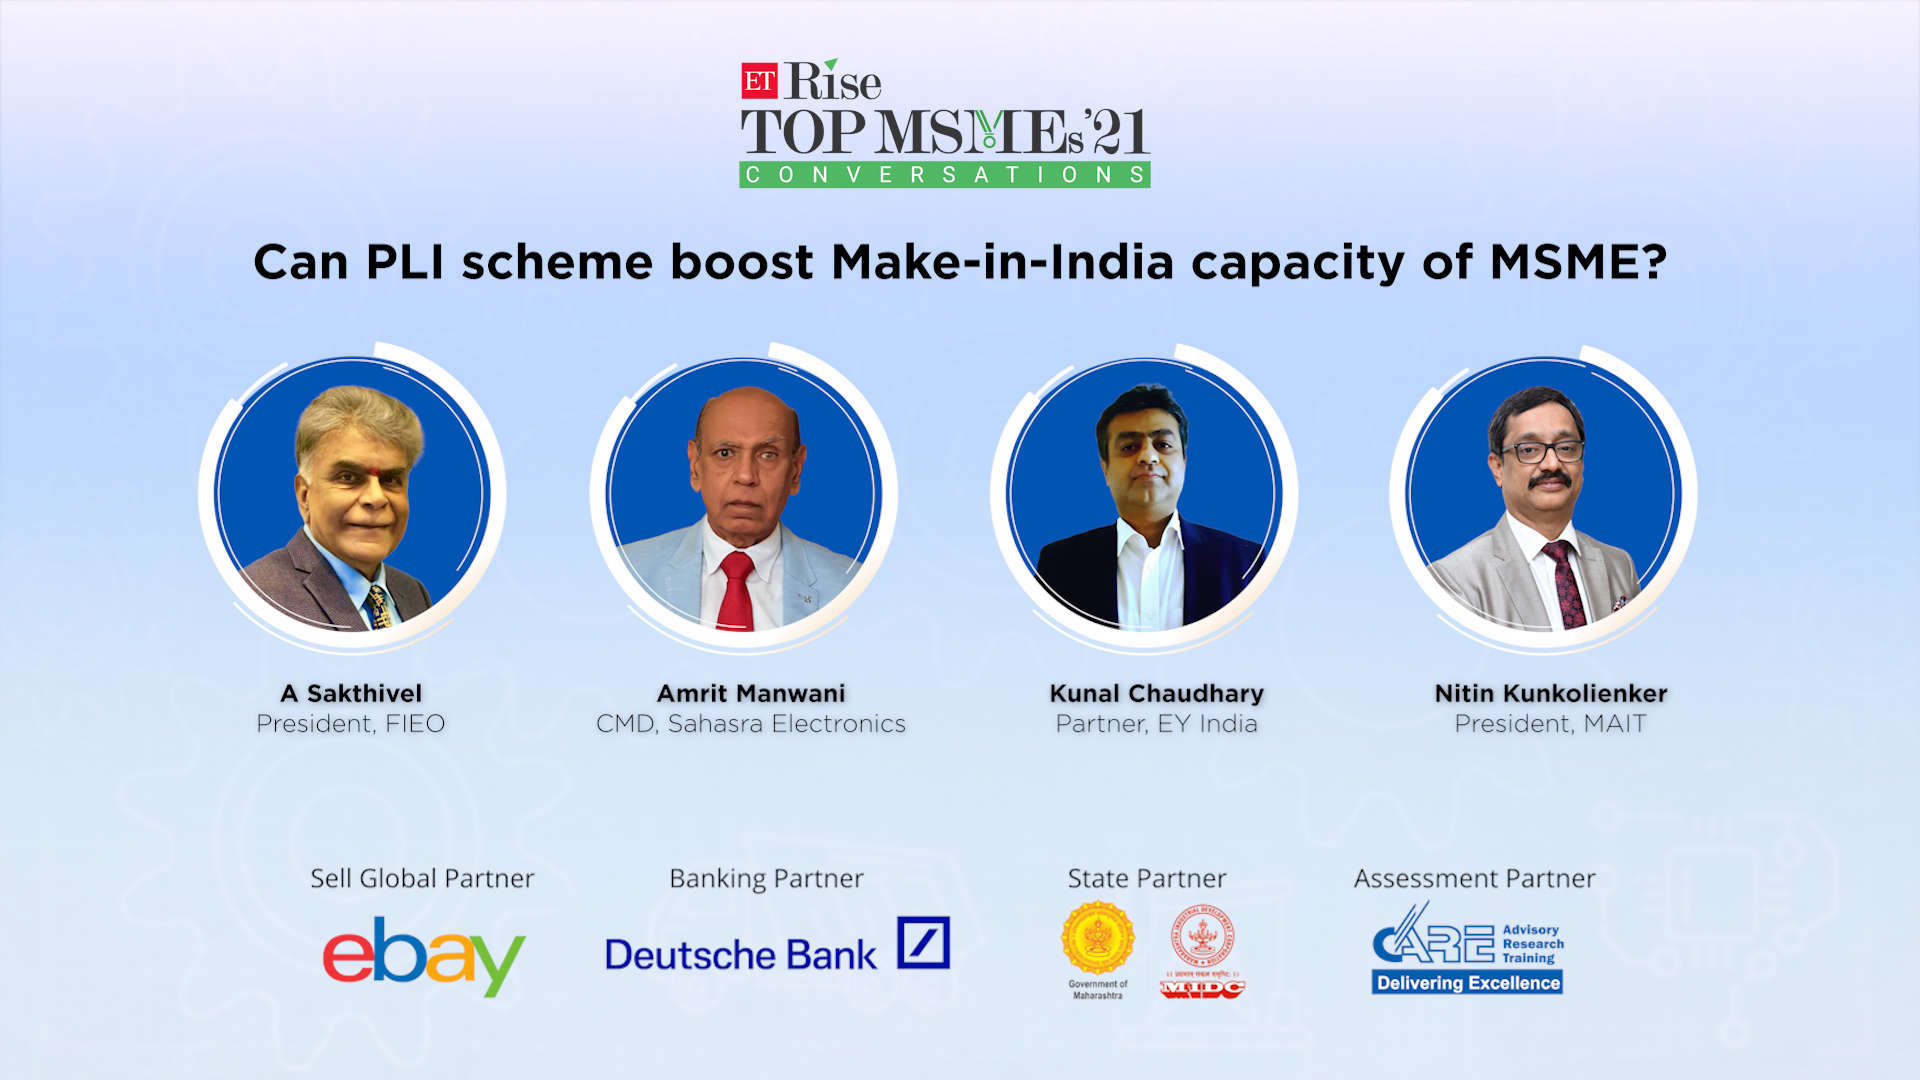 ETRise Top MSMEs '21 Conversations | Can PLI scheme boost Make-in-India capacity of MSME?